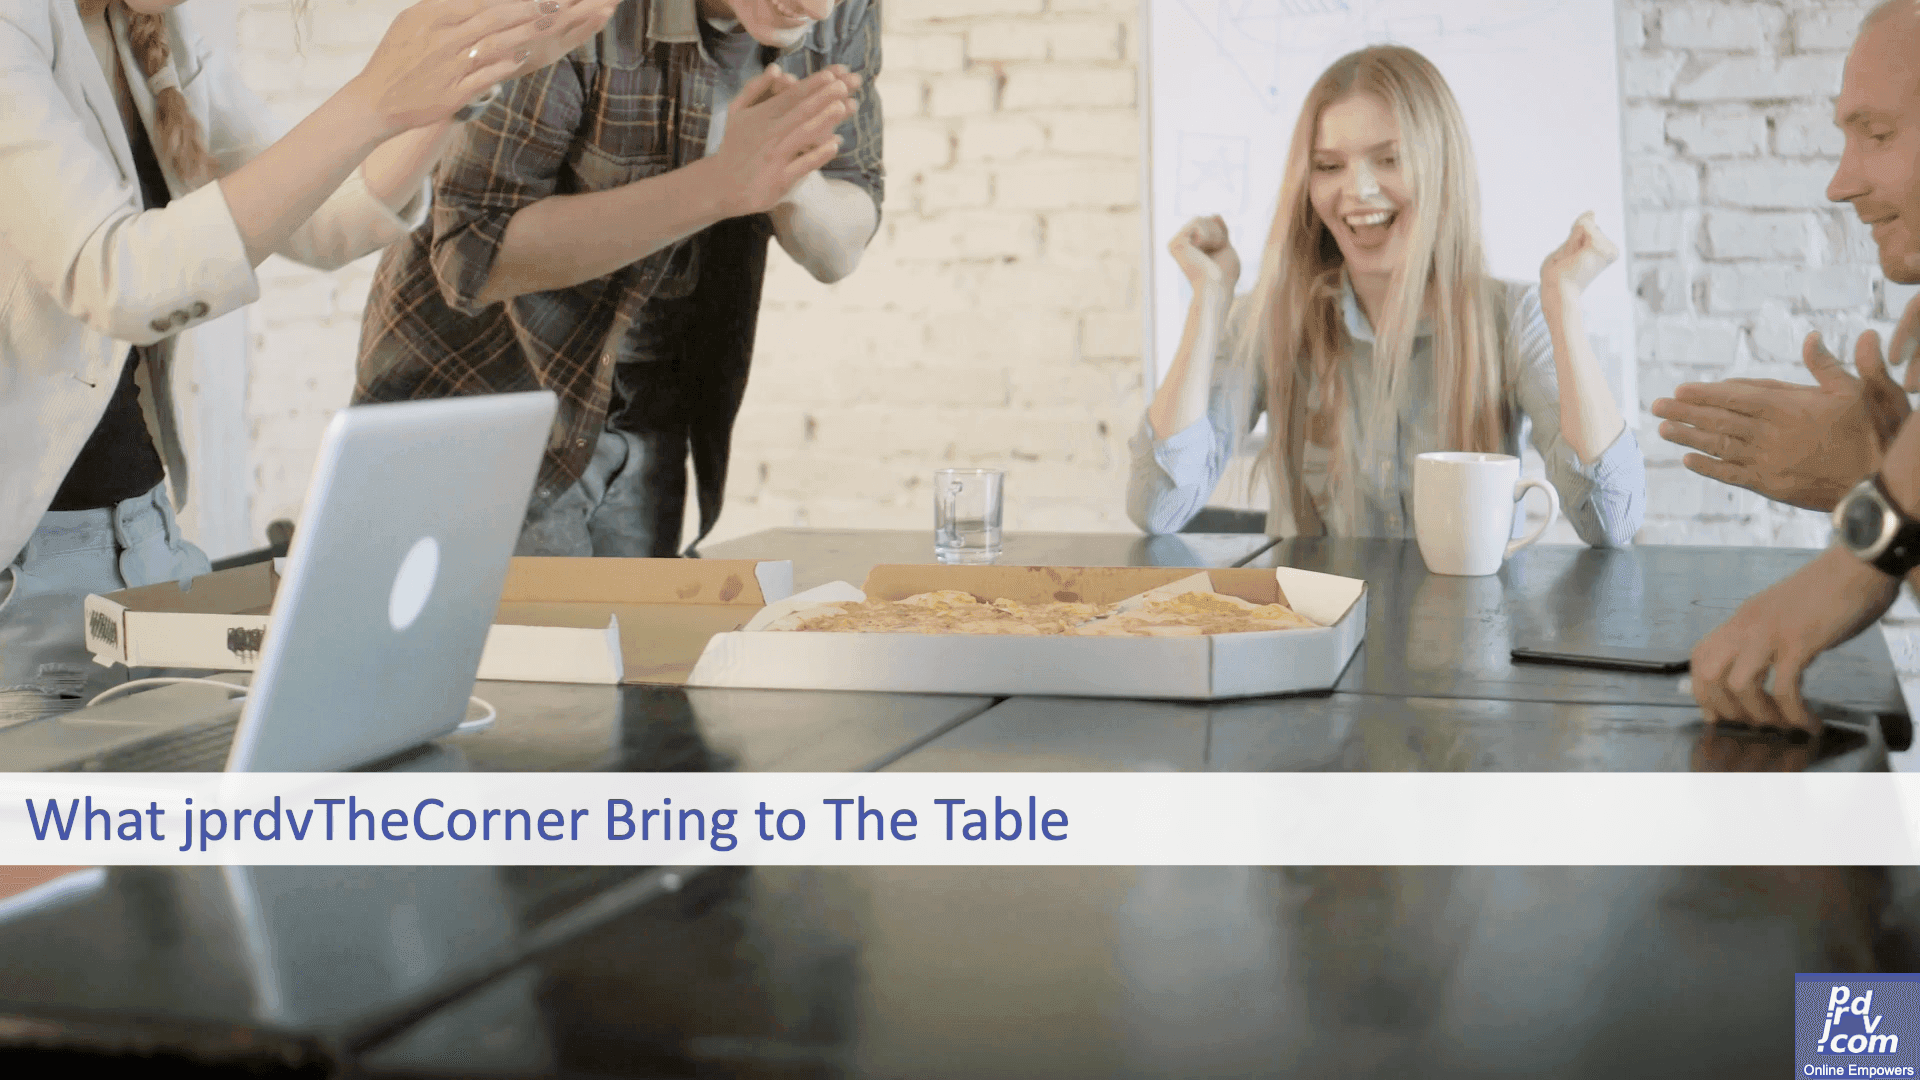 What jprdvTheCorner Brings to the Table